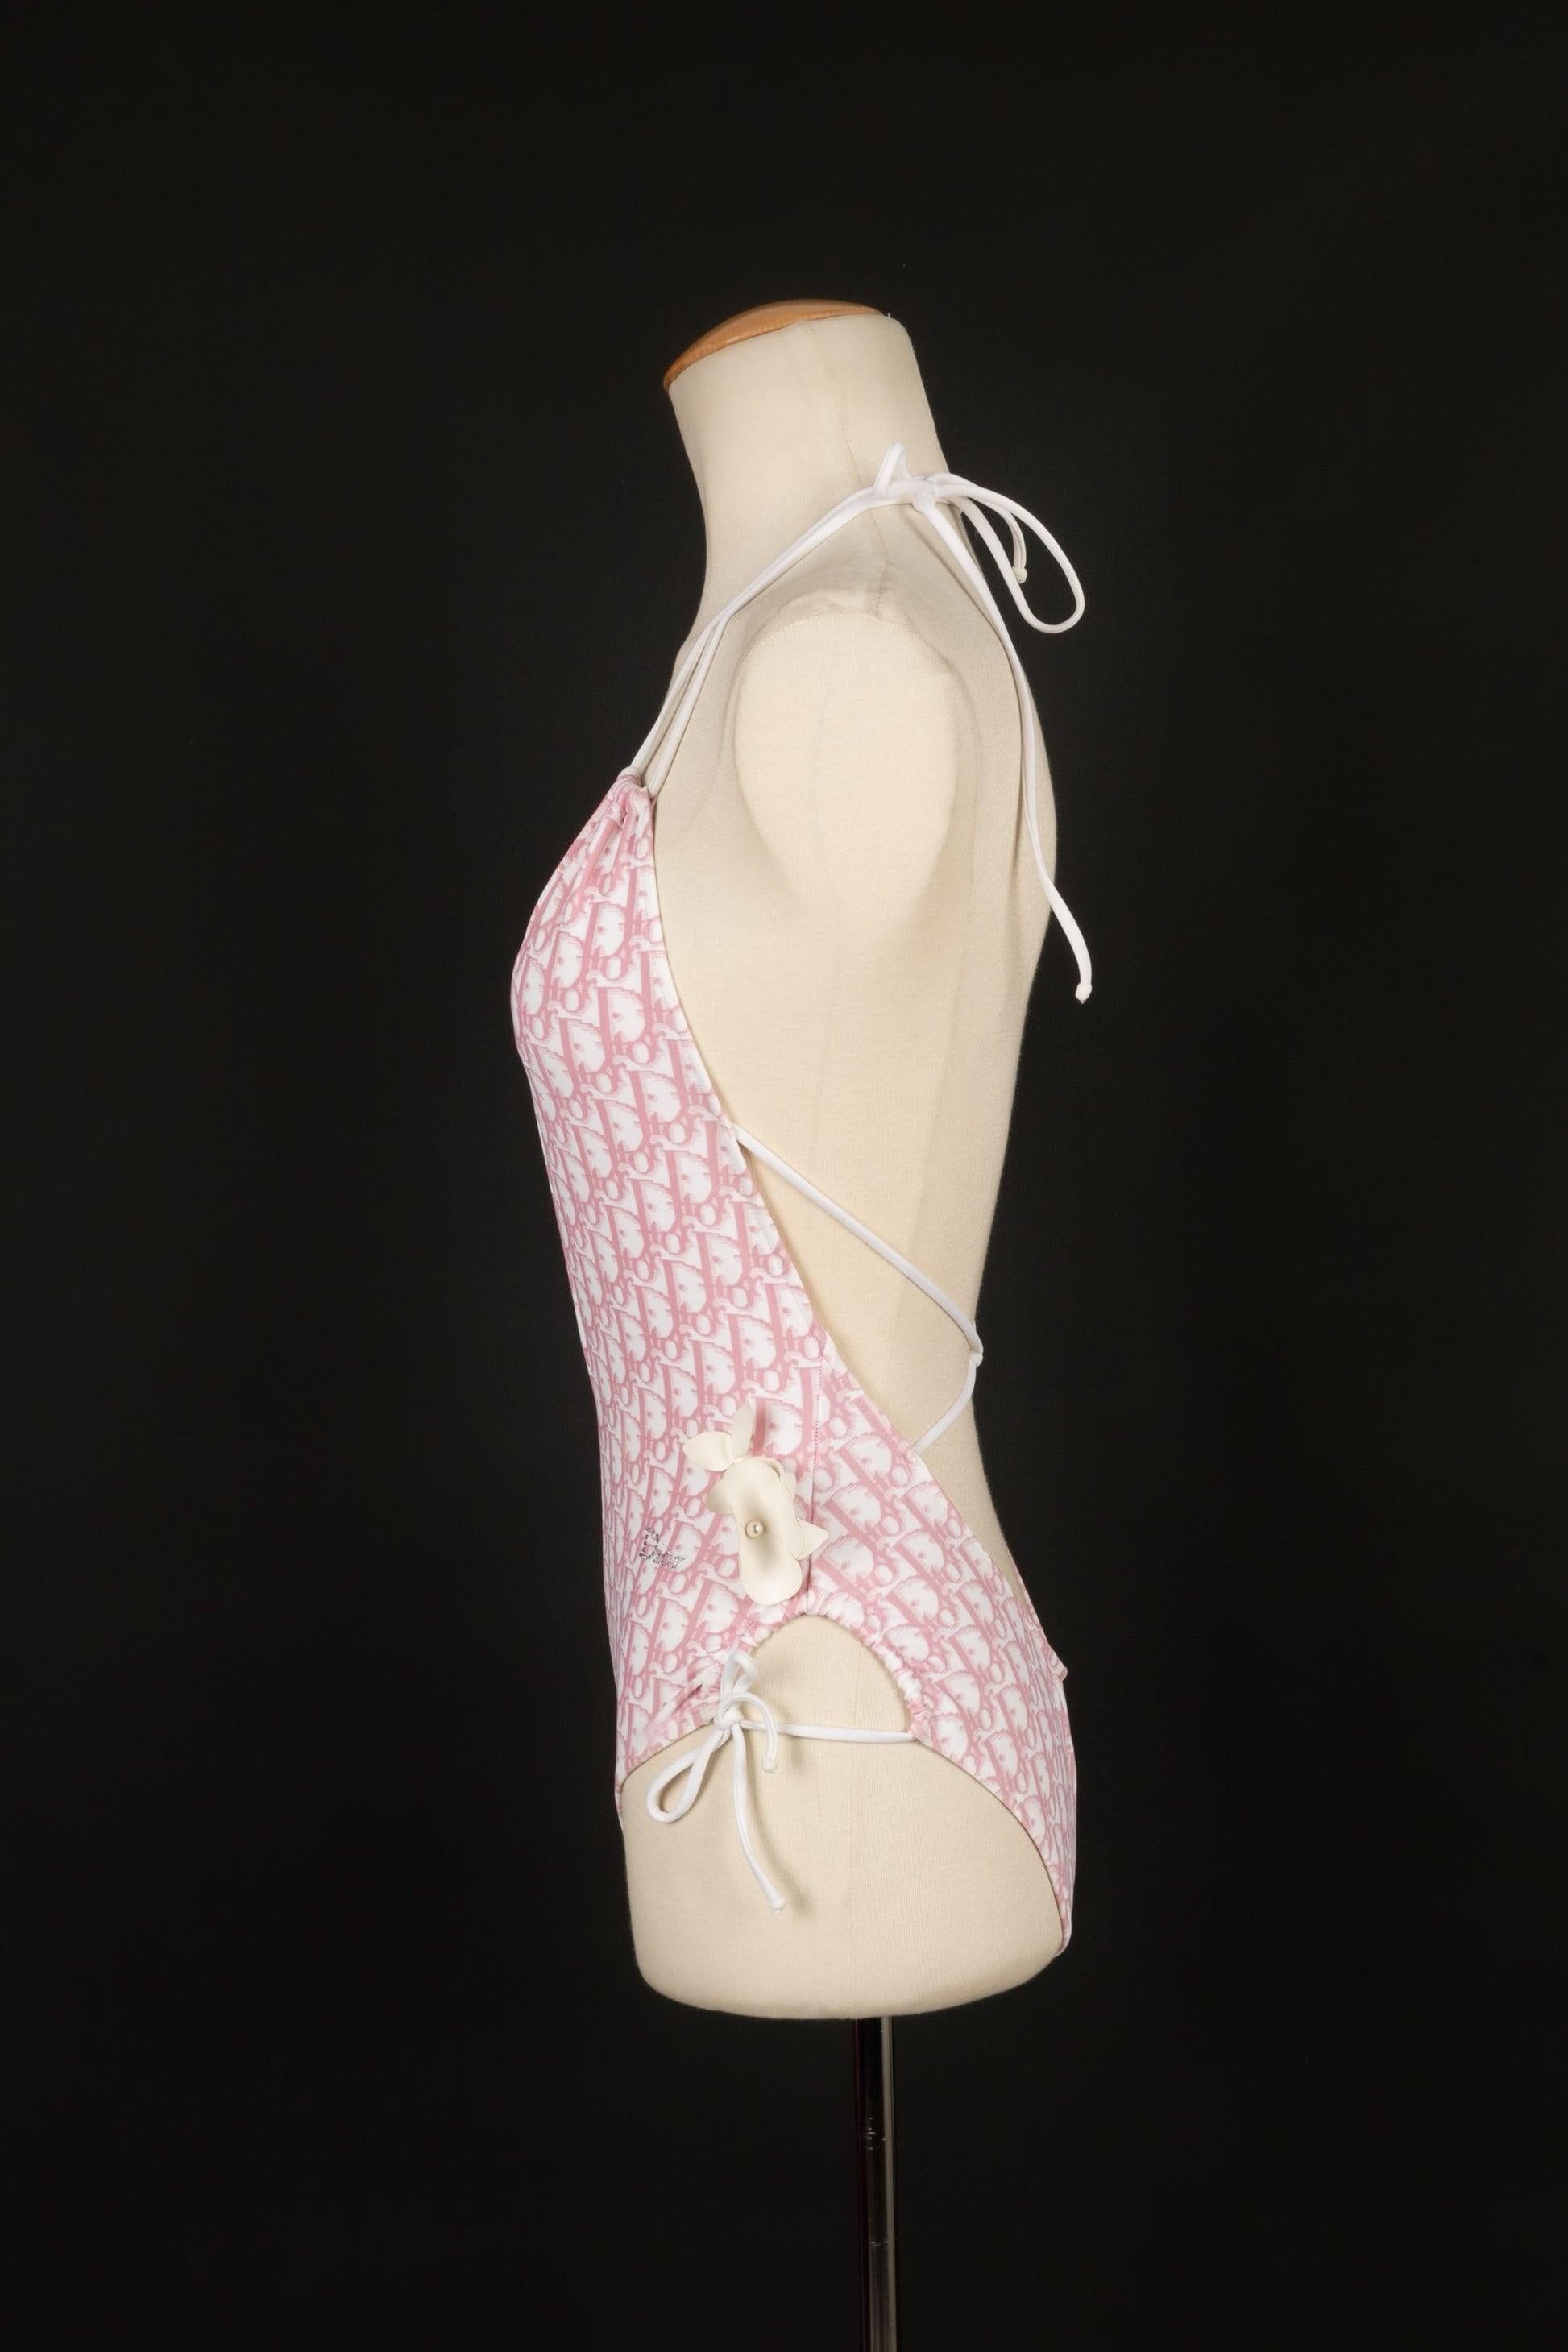 Dior - (Made in France) Pink and white branded one-piece swimsuit. Size 36FR.

Additional information:
Condition: Very good condition

Seller reference: FH184